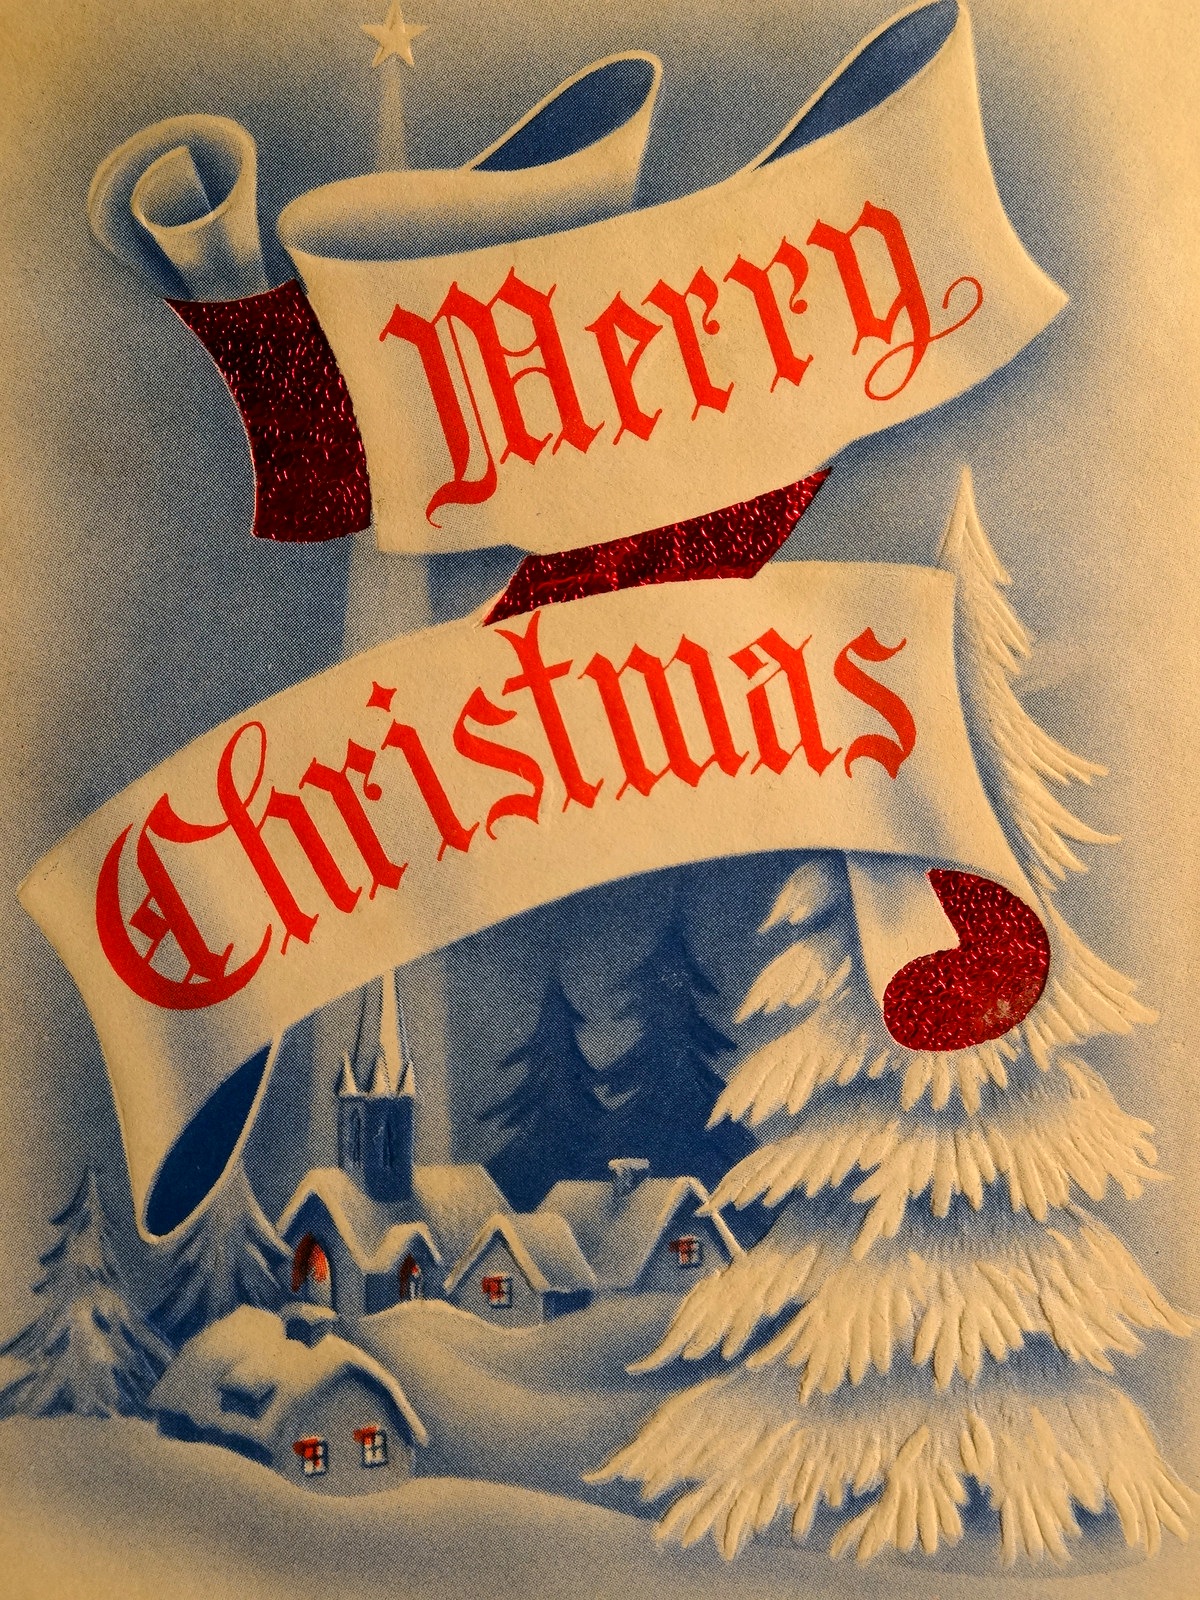 More vintage Christmas cards